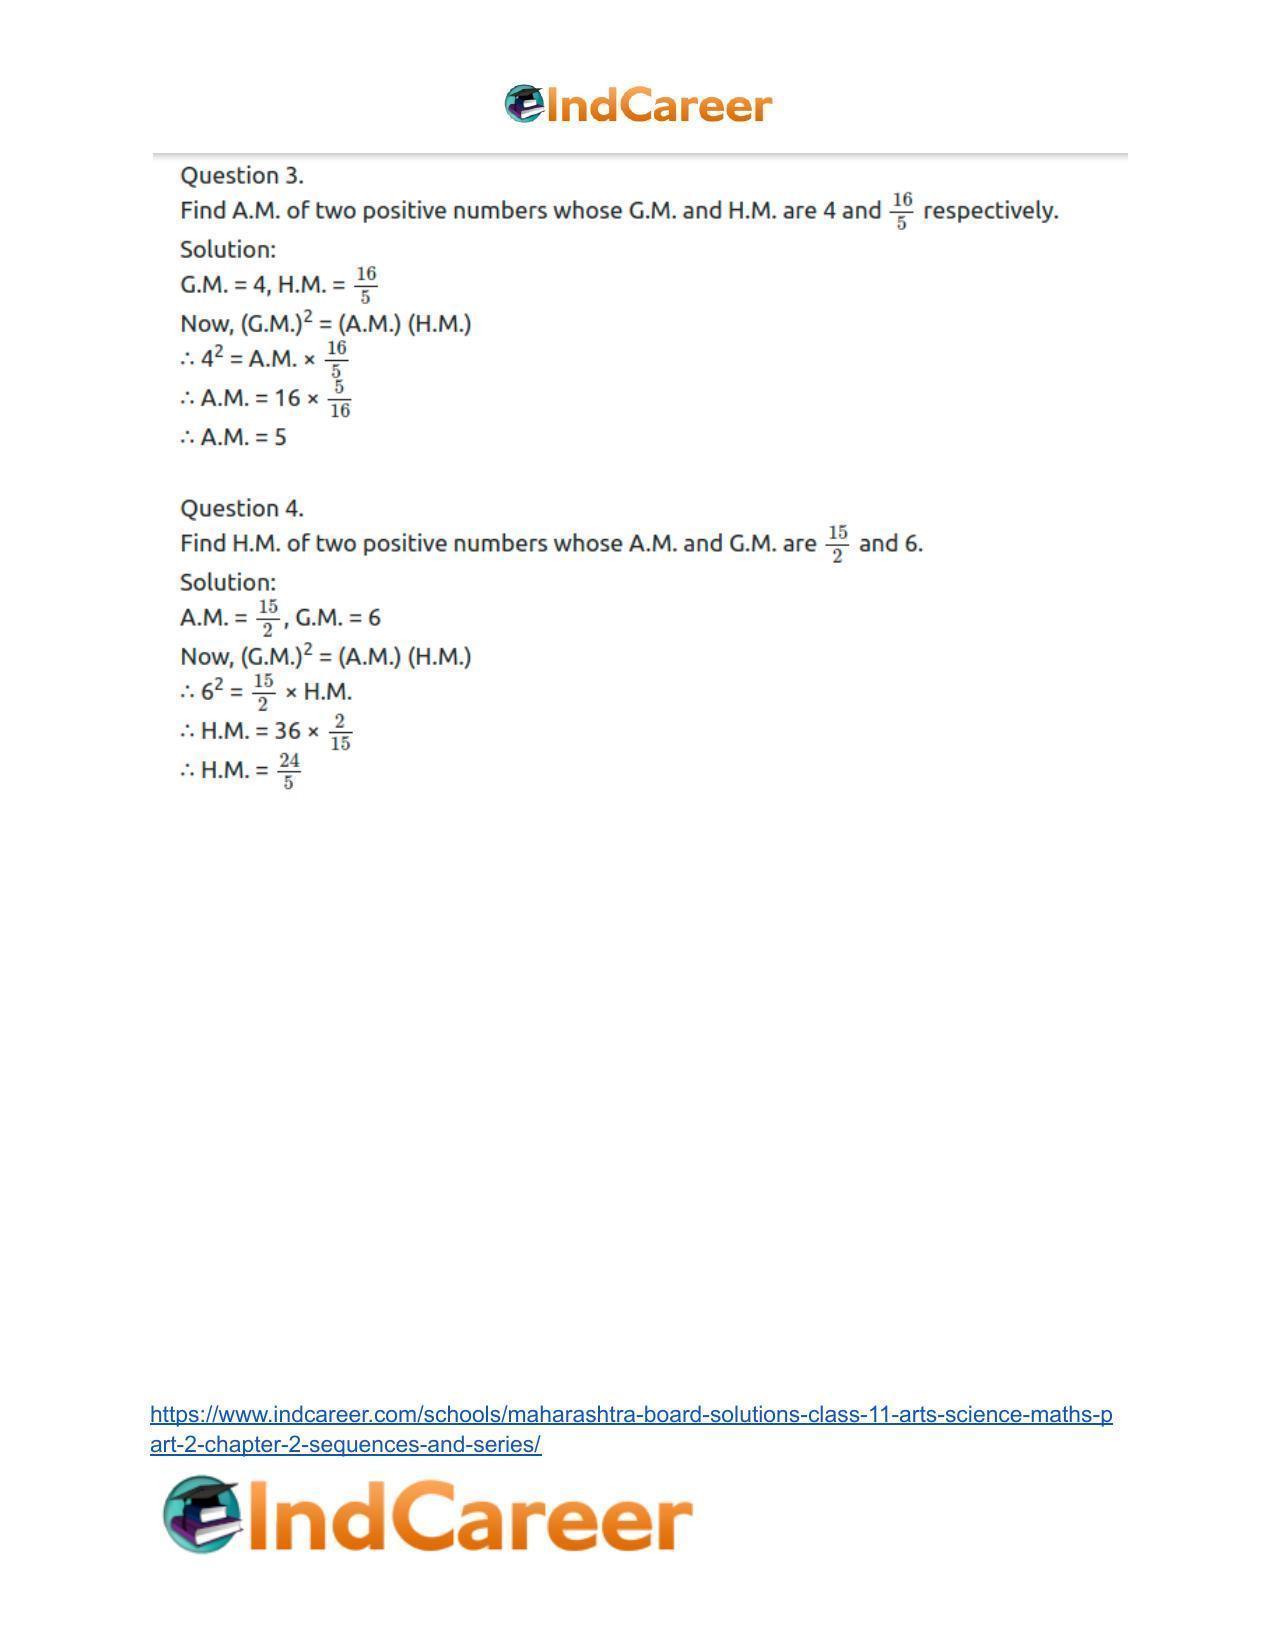 Maharashtra Board Solutions Class 11-Arts & Science Maths (Part 2): Chapter 2- Sequences and Series - Page 54